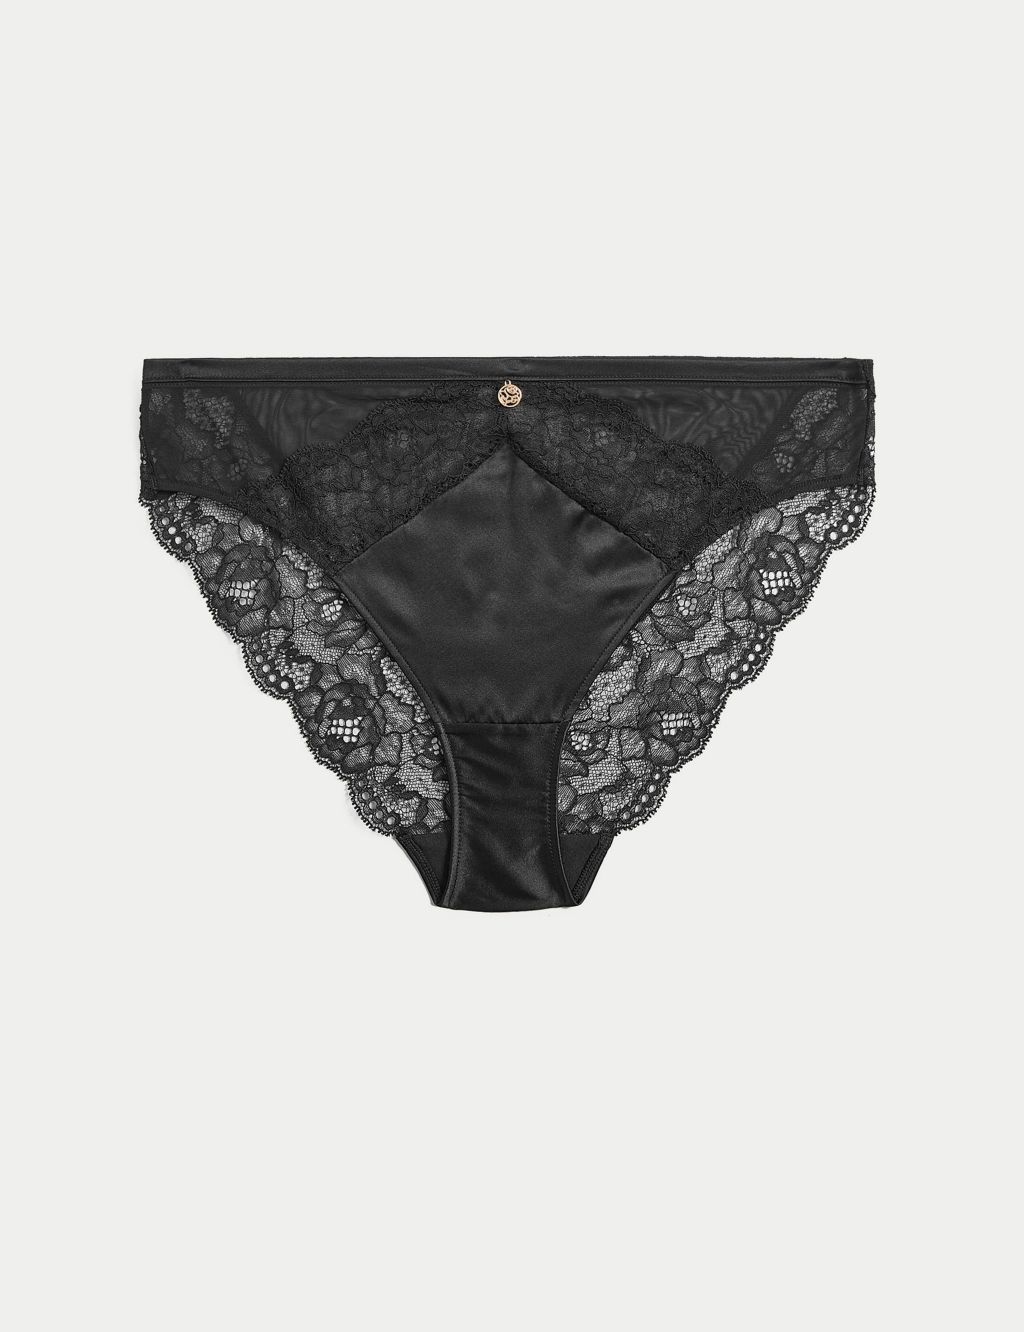 Aster Sparkle Lace French Knickers, Rosie